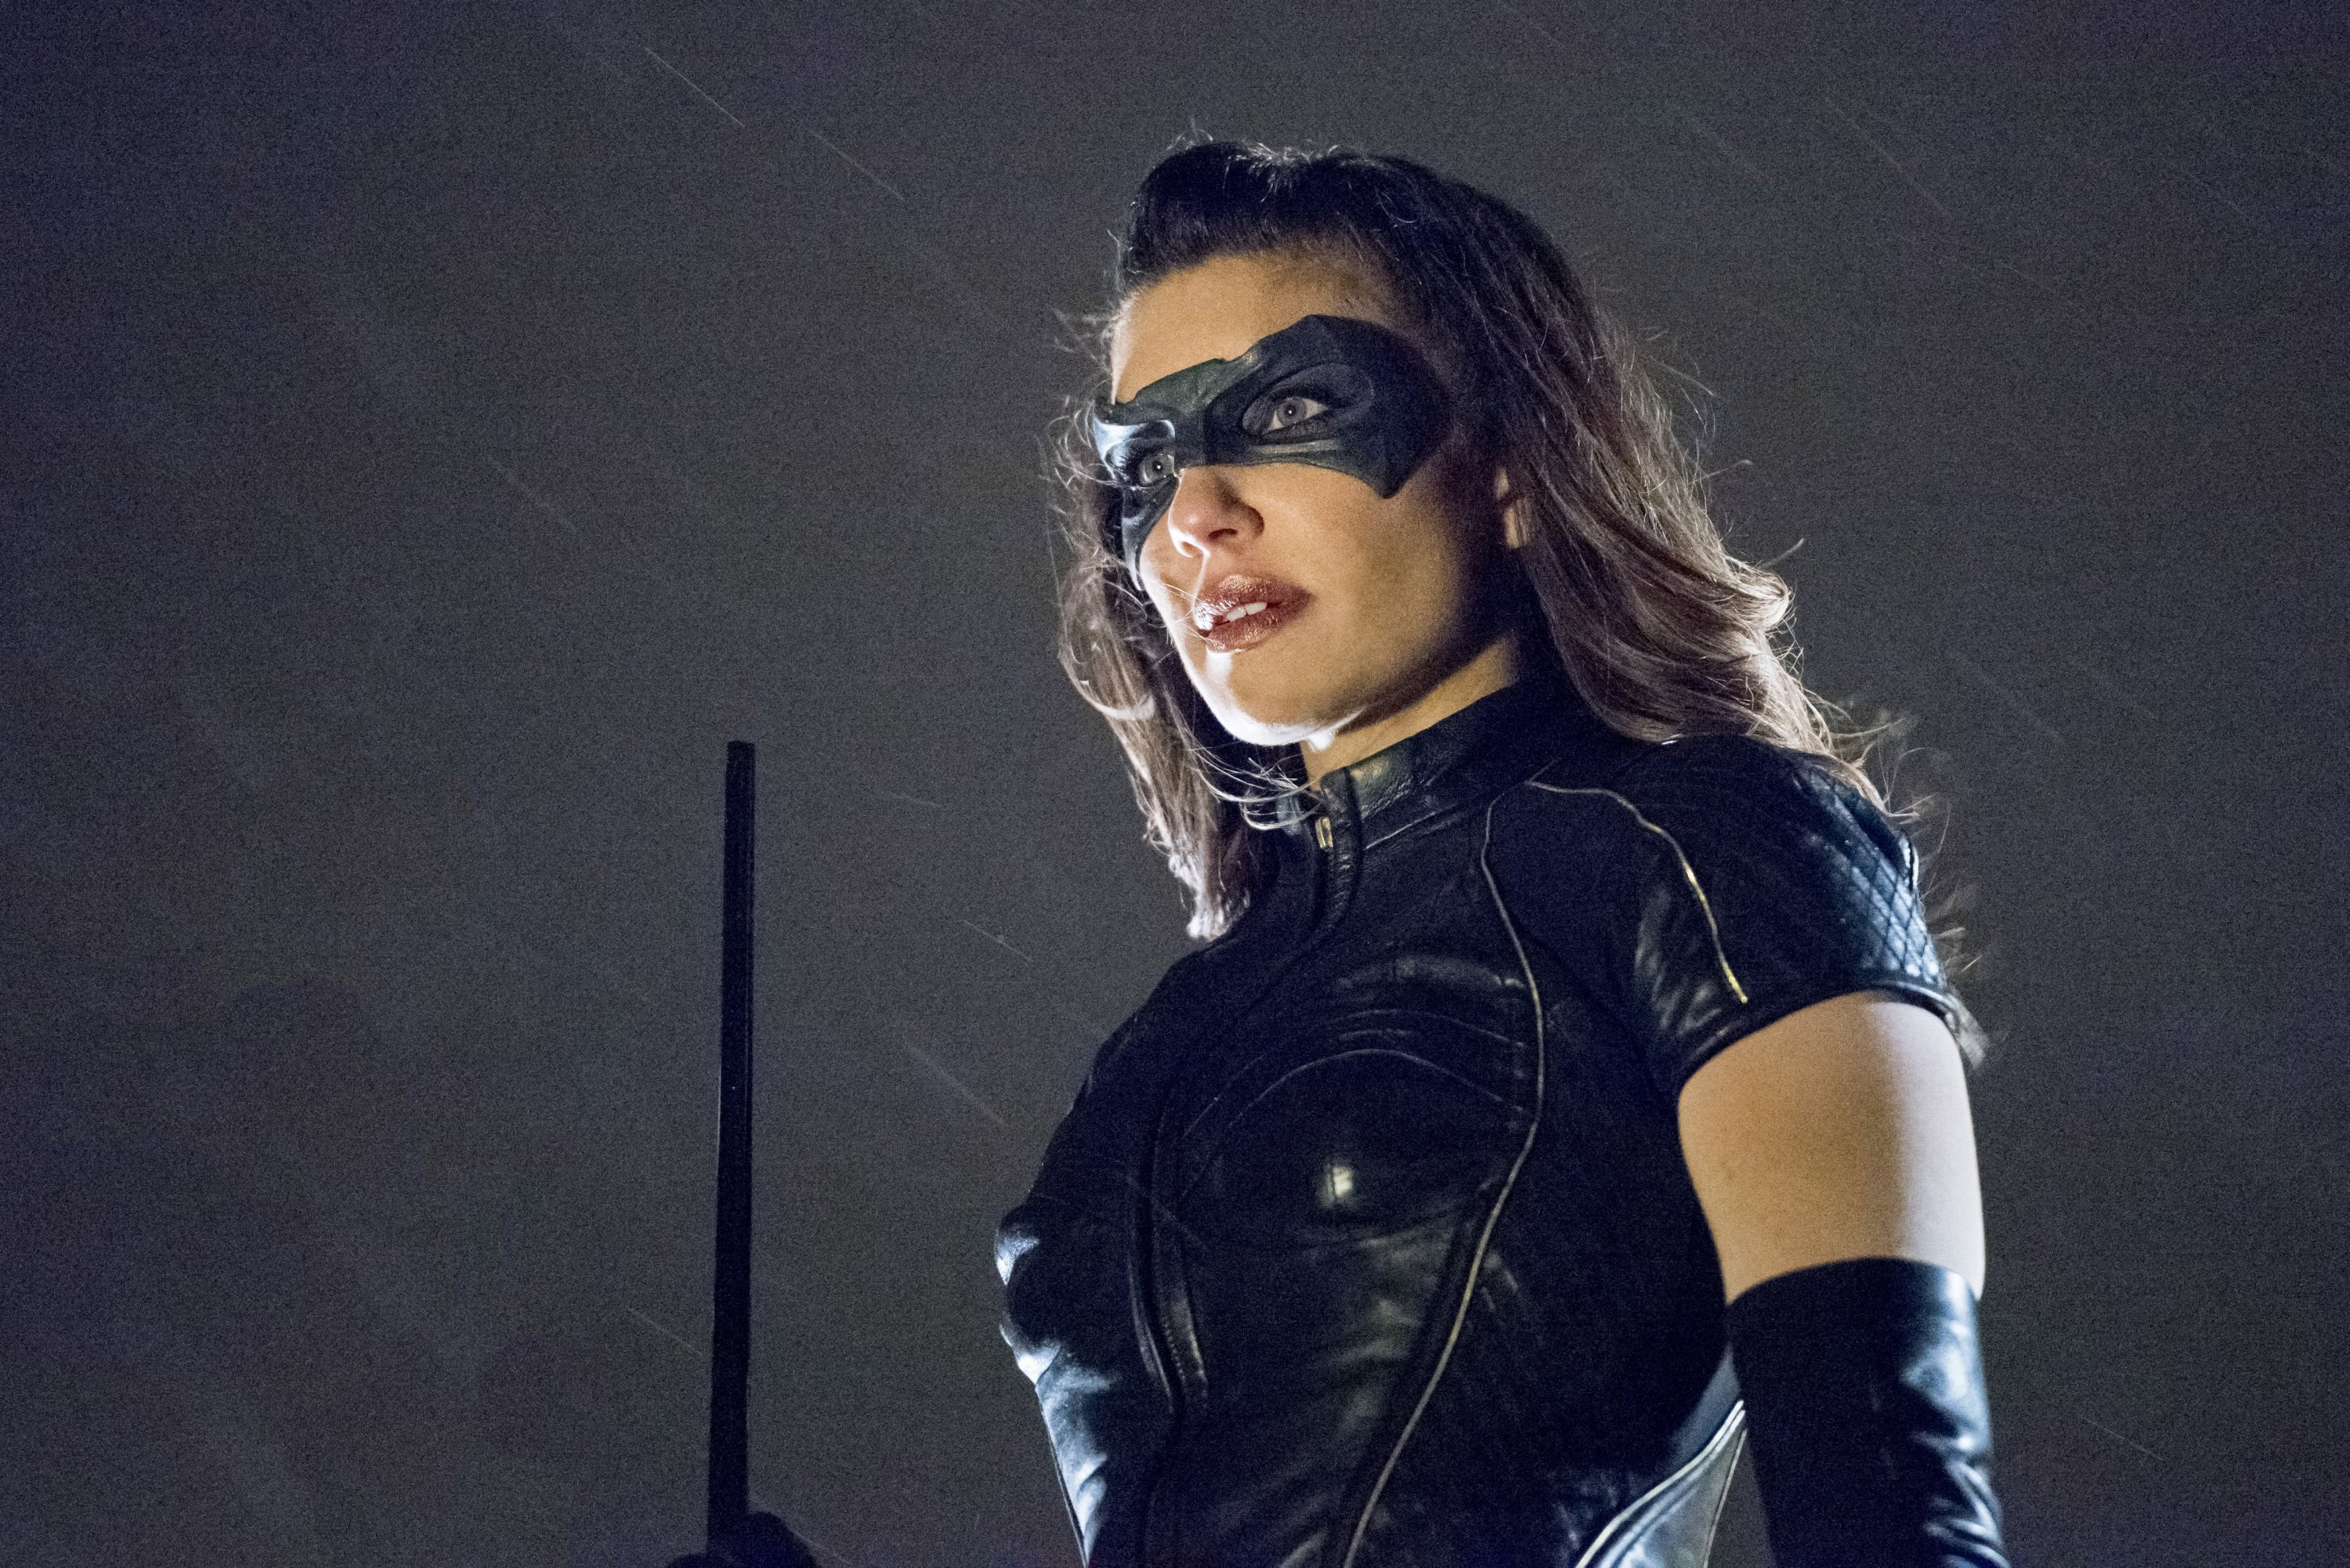 Black Canary Arrow Season 6 2018 Hd Tv Shows 4k Wallpapers Images Backgrounds Photos And